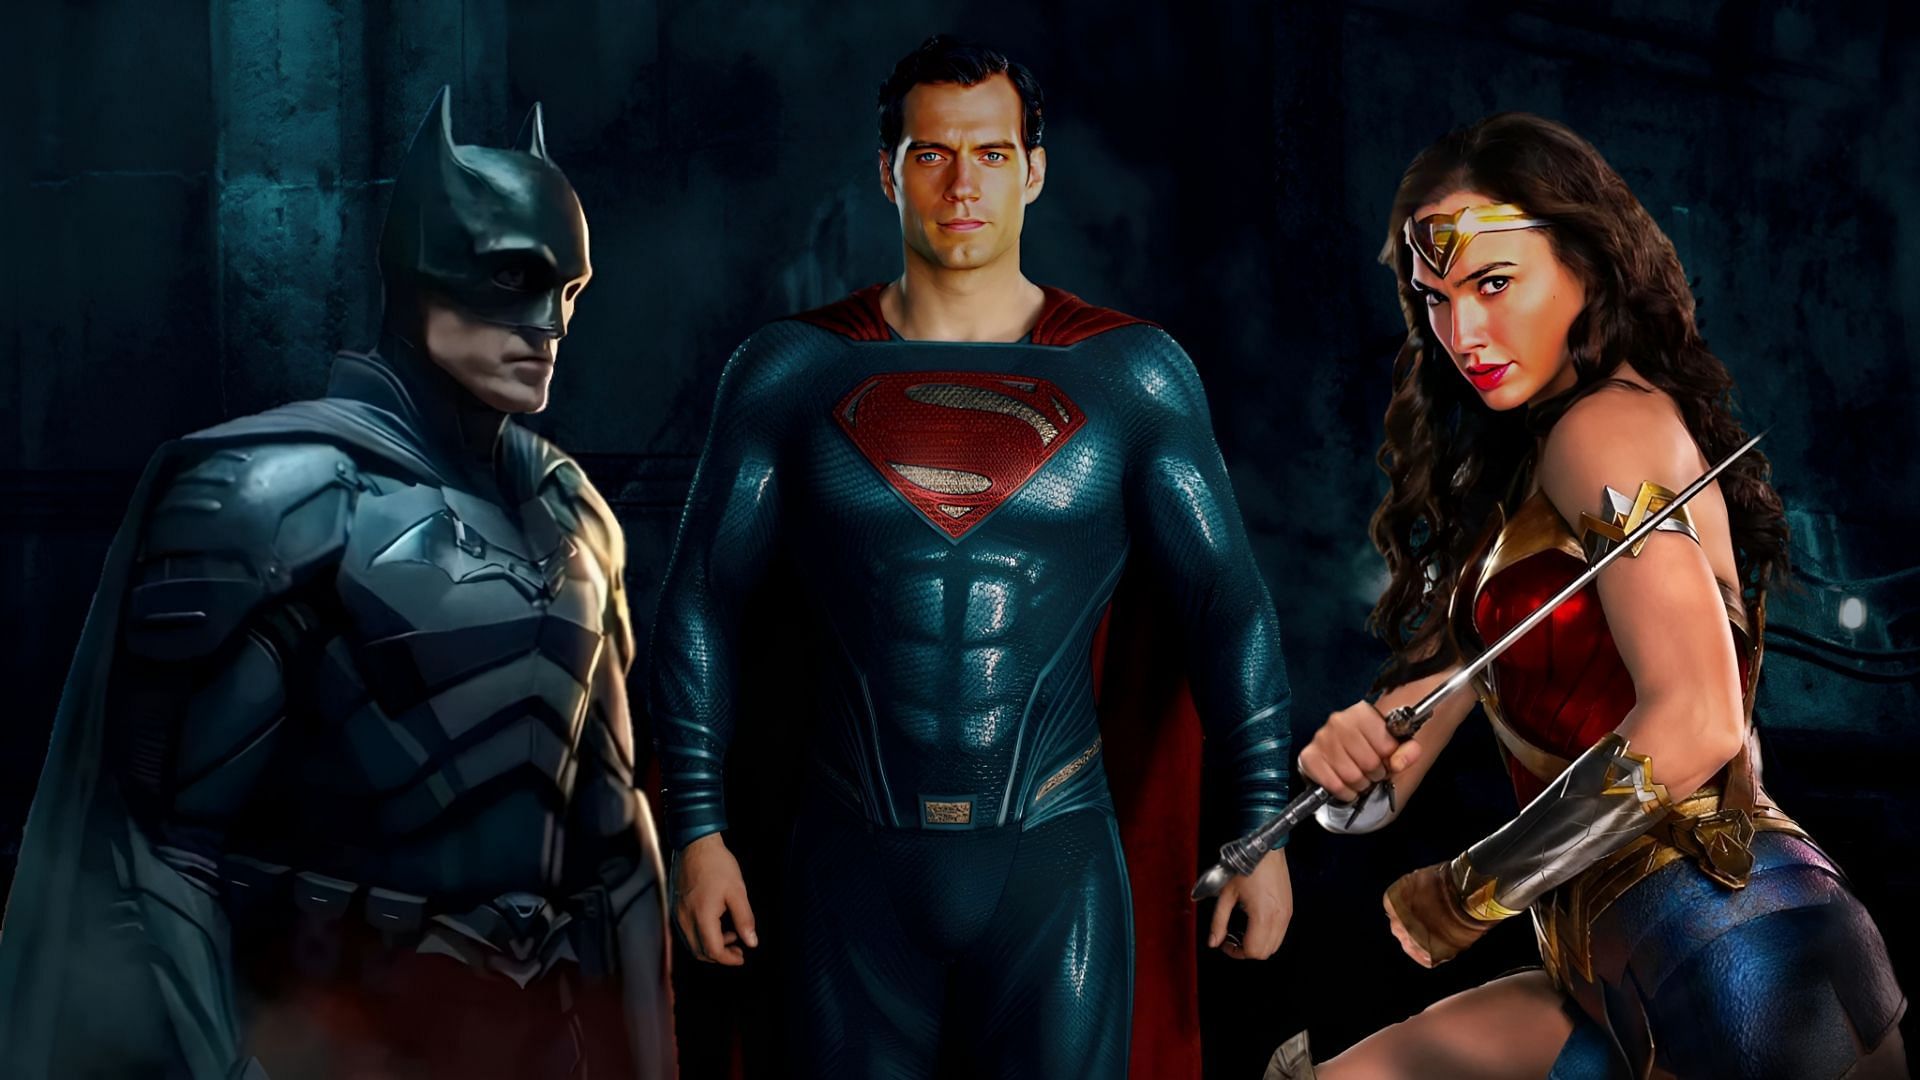 In a hypothetical battle between the DC Trinity vs Marvel&#039;s Big Three, if one had to choose, the DC Trinity would likely come out on top. (Image via Sportskeeda)